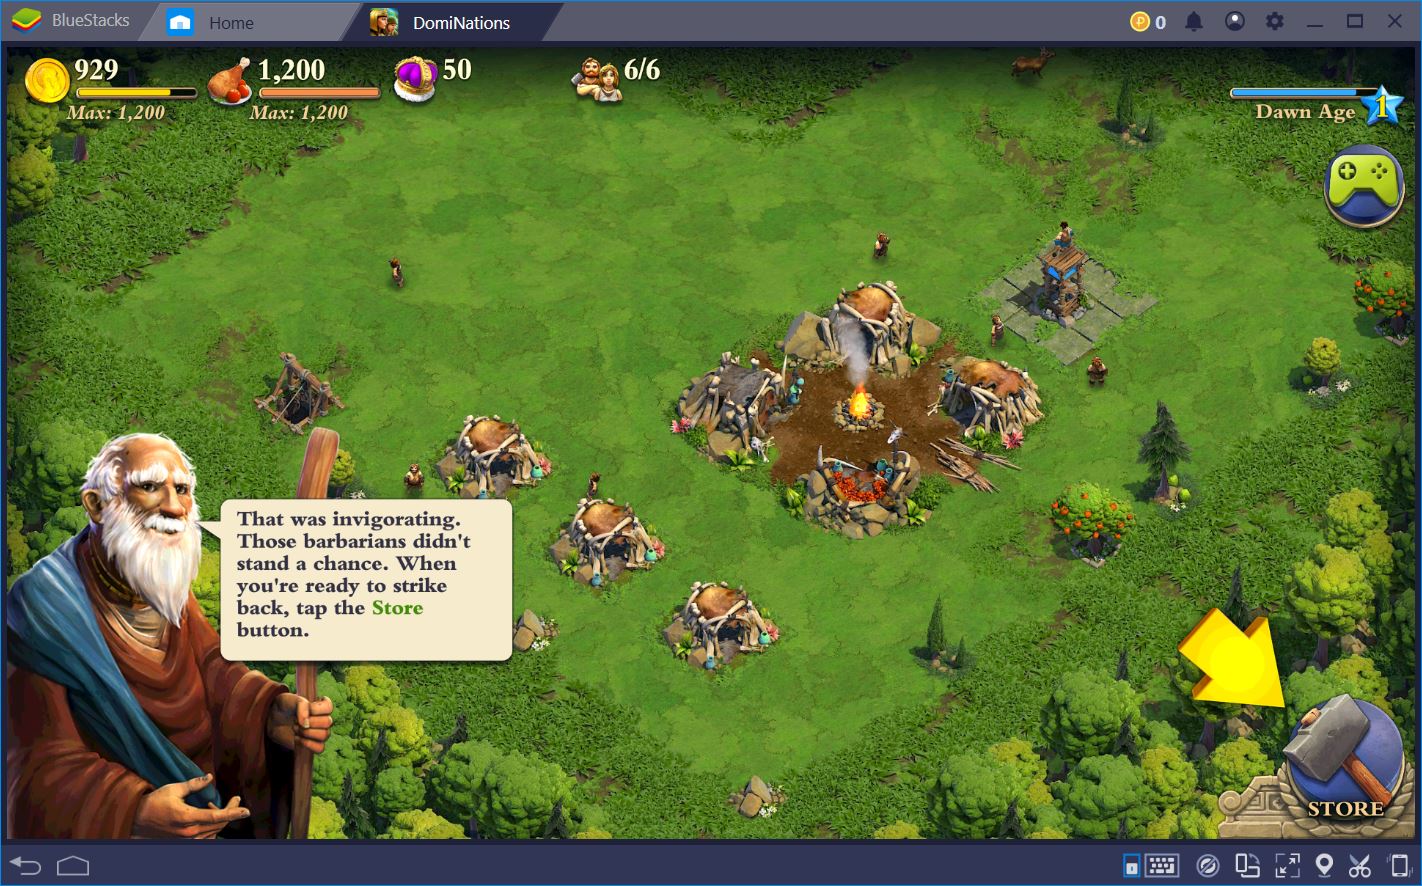 DomiNations: Conquer the World with BlueStacks